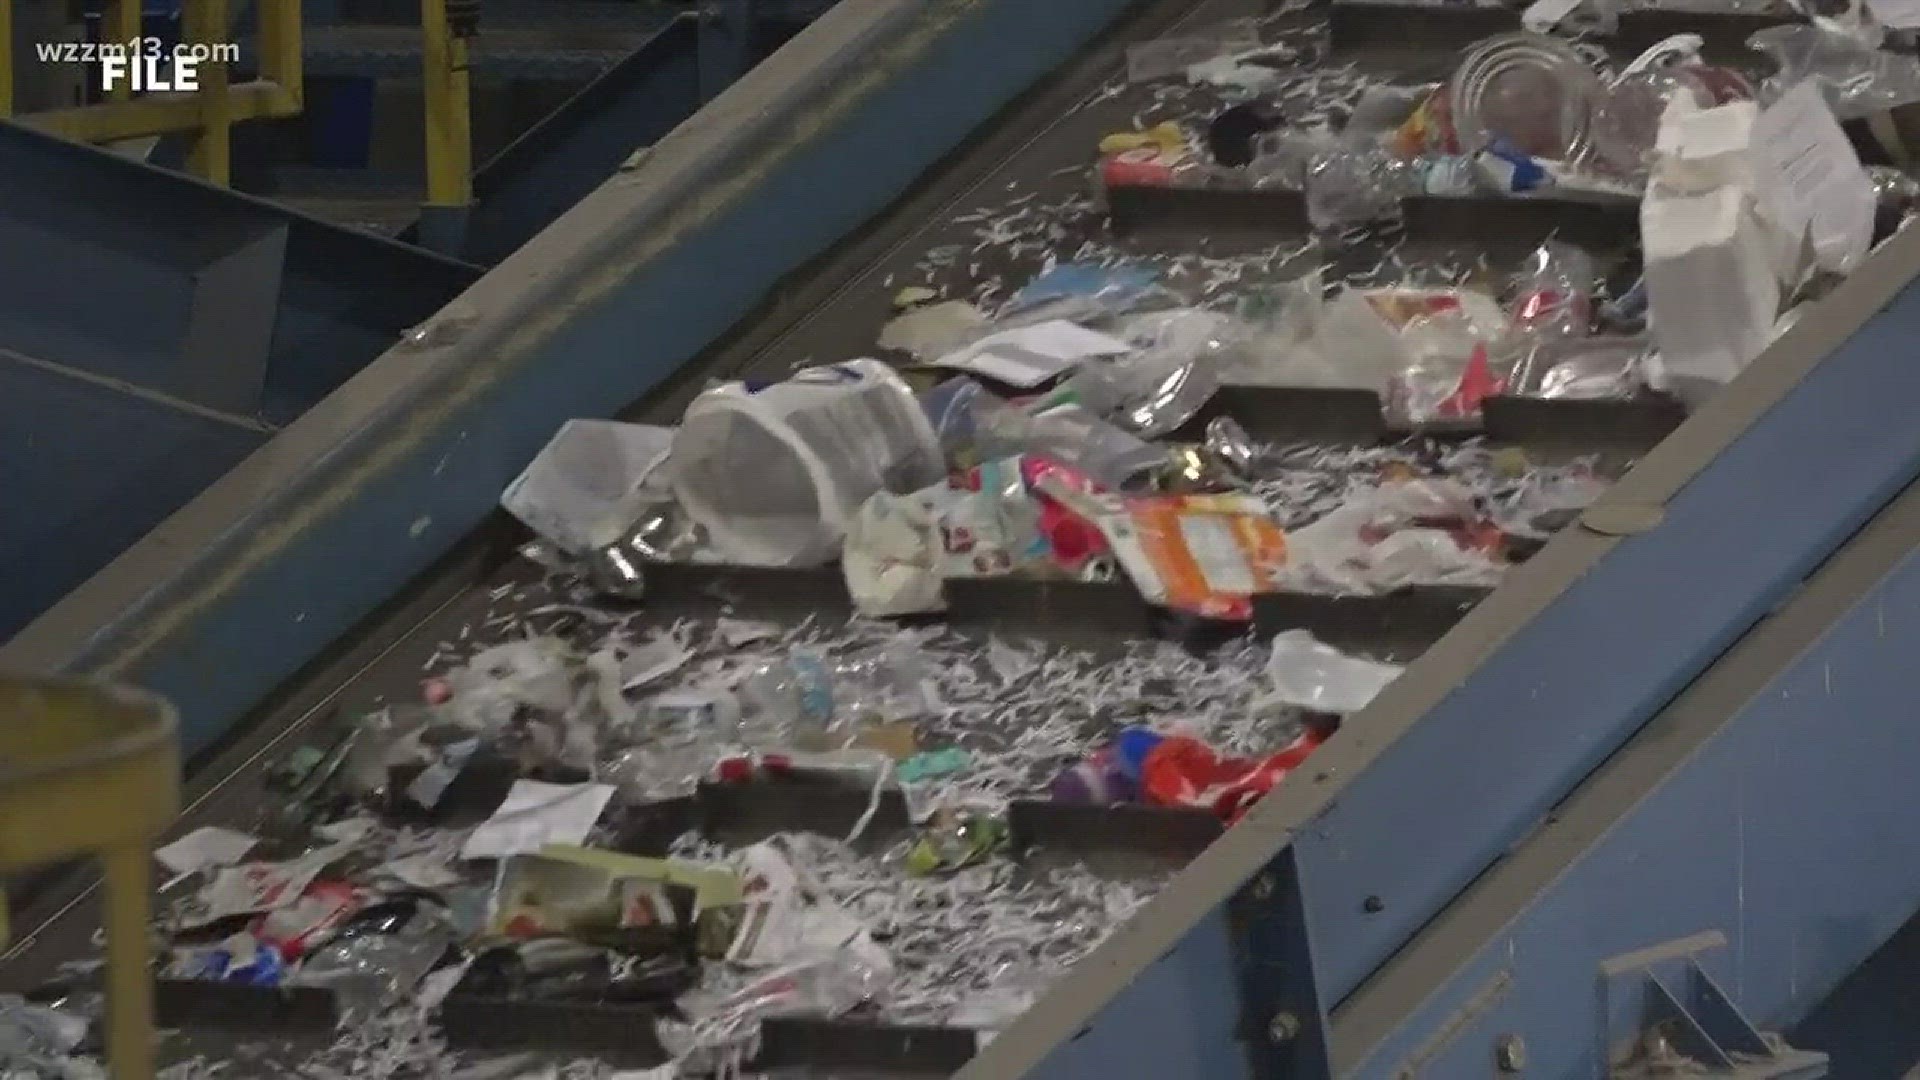 Kent County workers show how recycling works, part 1